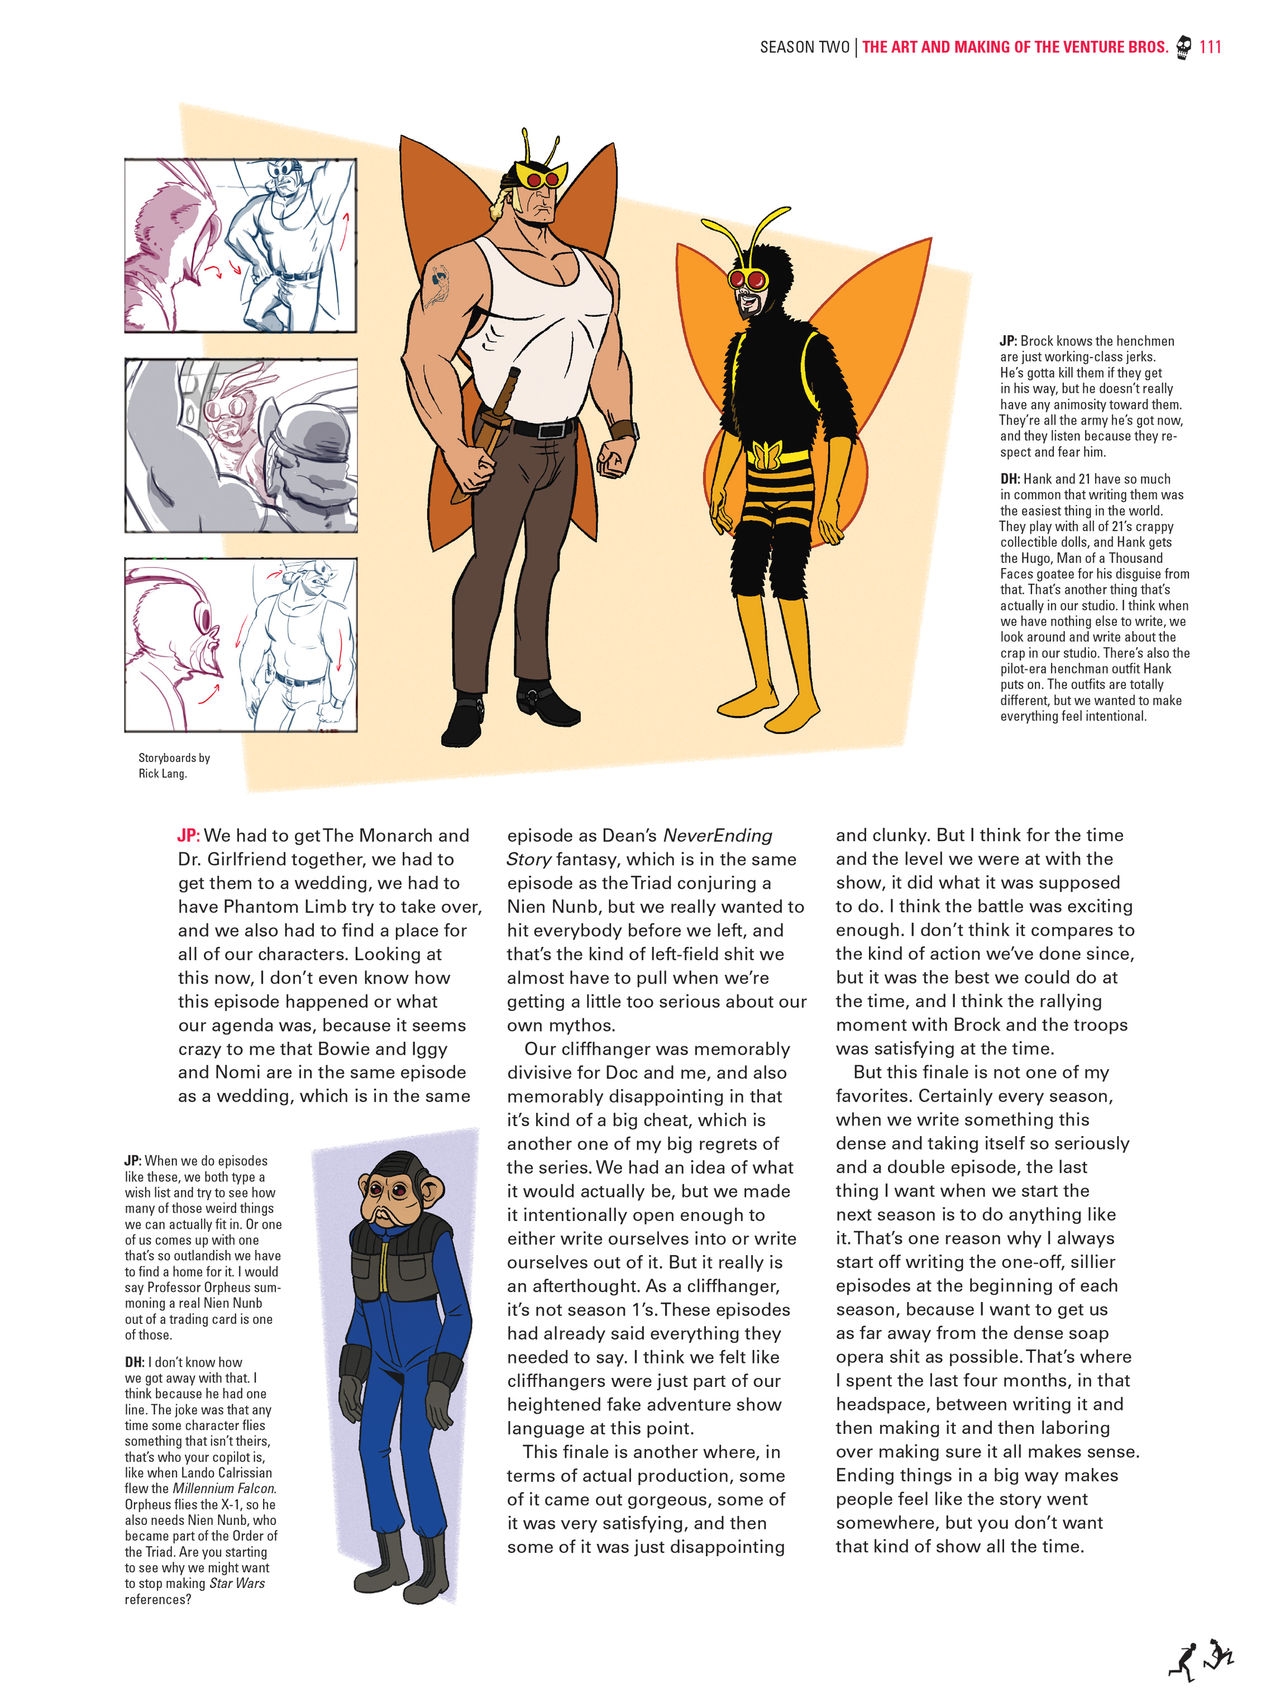 Go Team Venture! - The Art and Making of the Venture Bros 110